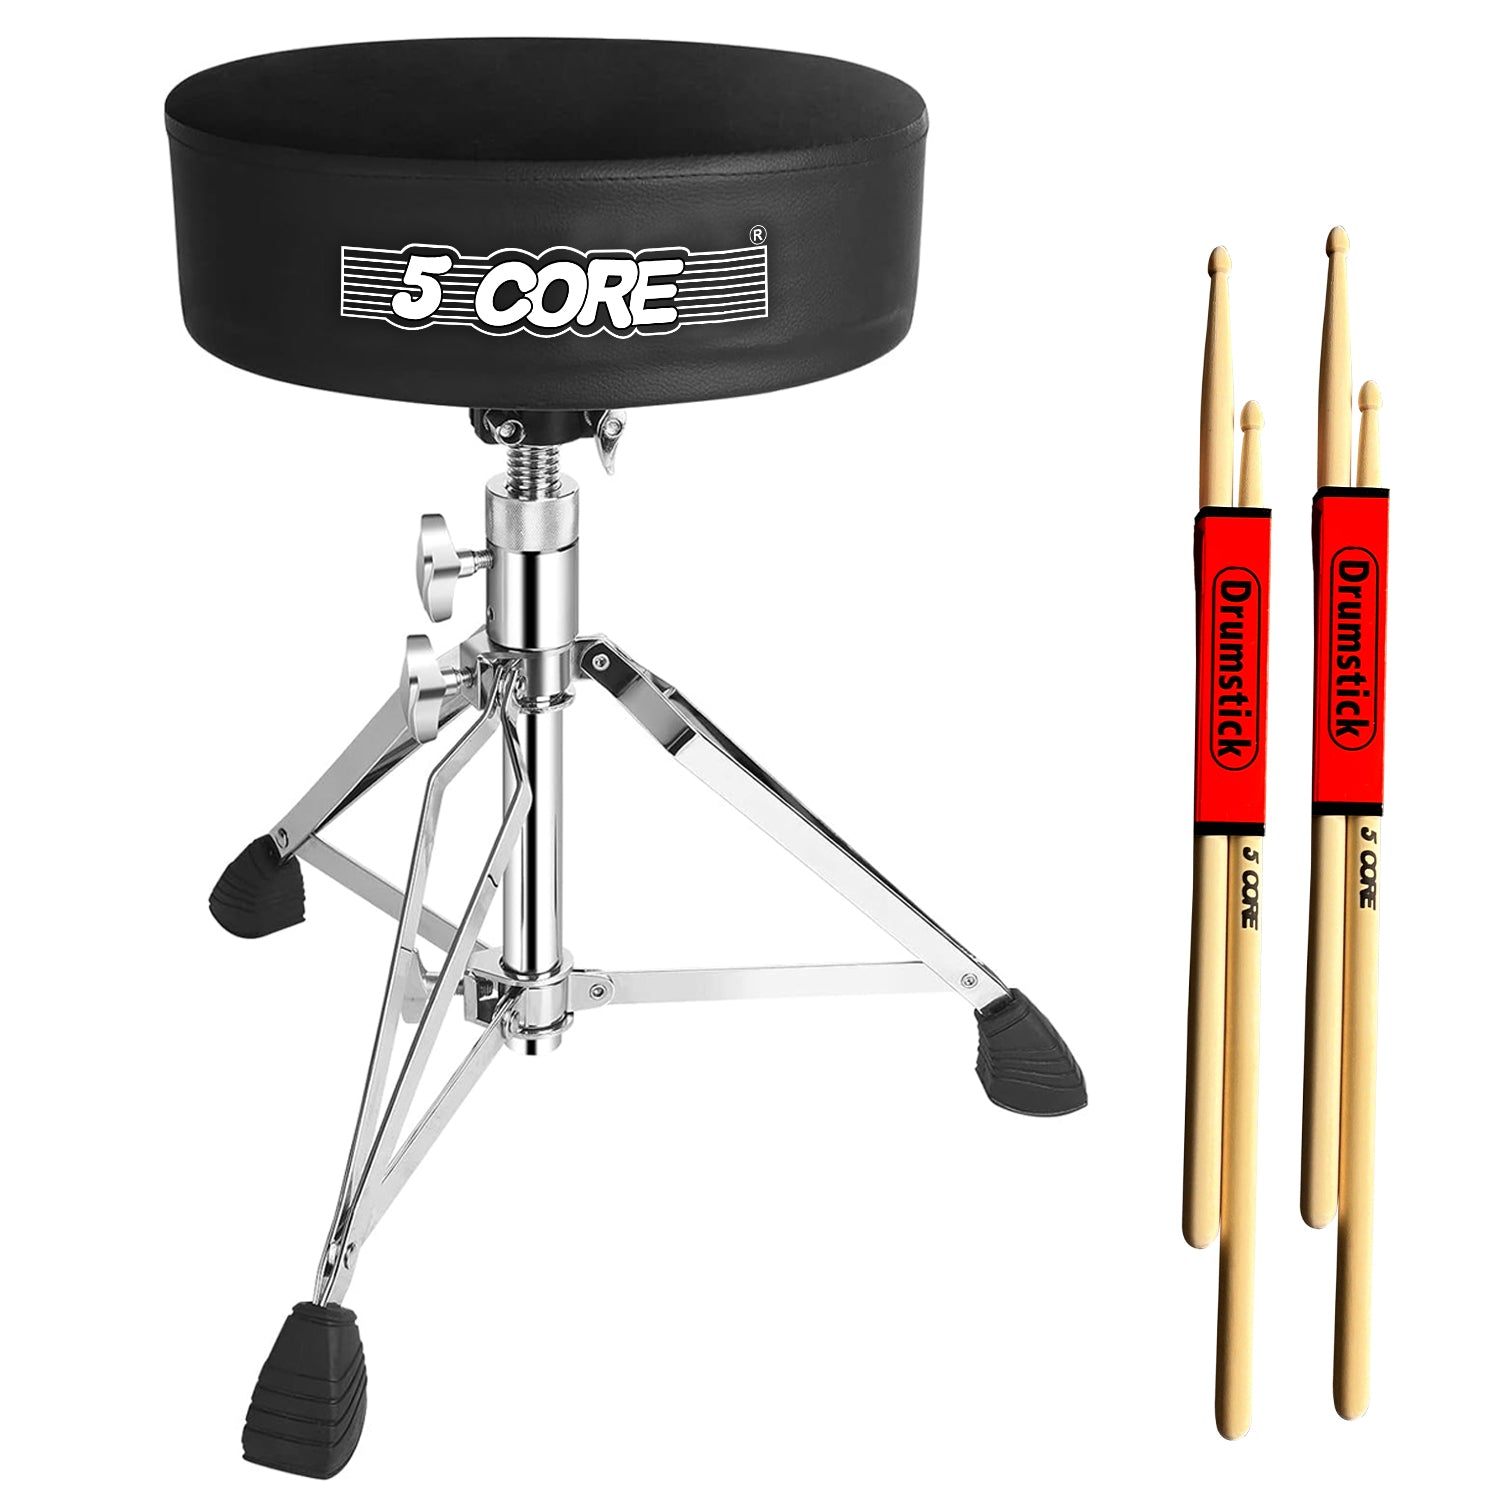 5 Core Drum Throne Comfortable Padded Guitar Stool Height Adjustable Music DJ Chair Heavy Duty Seat